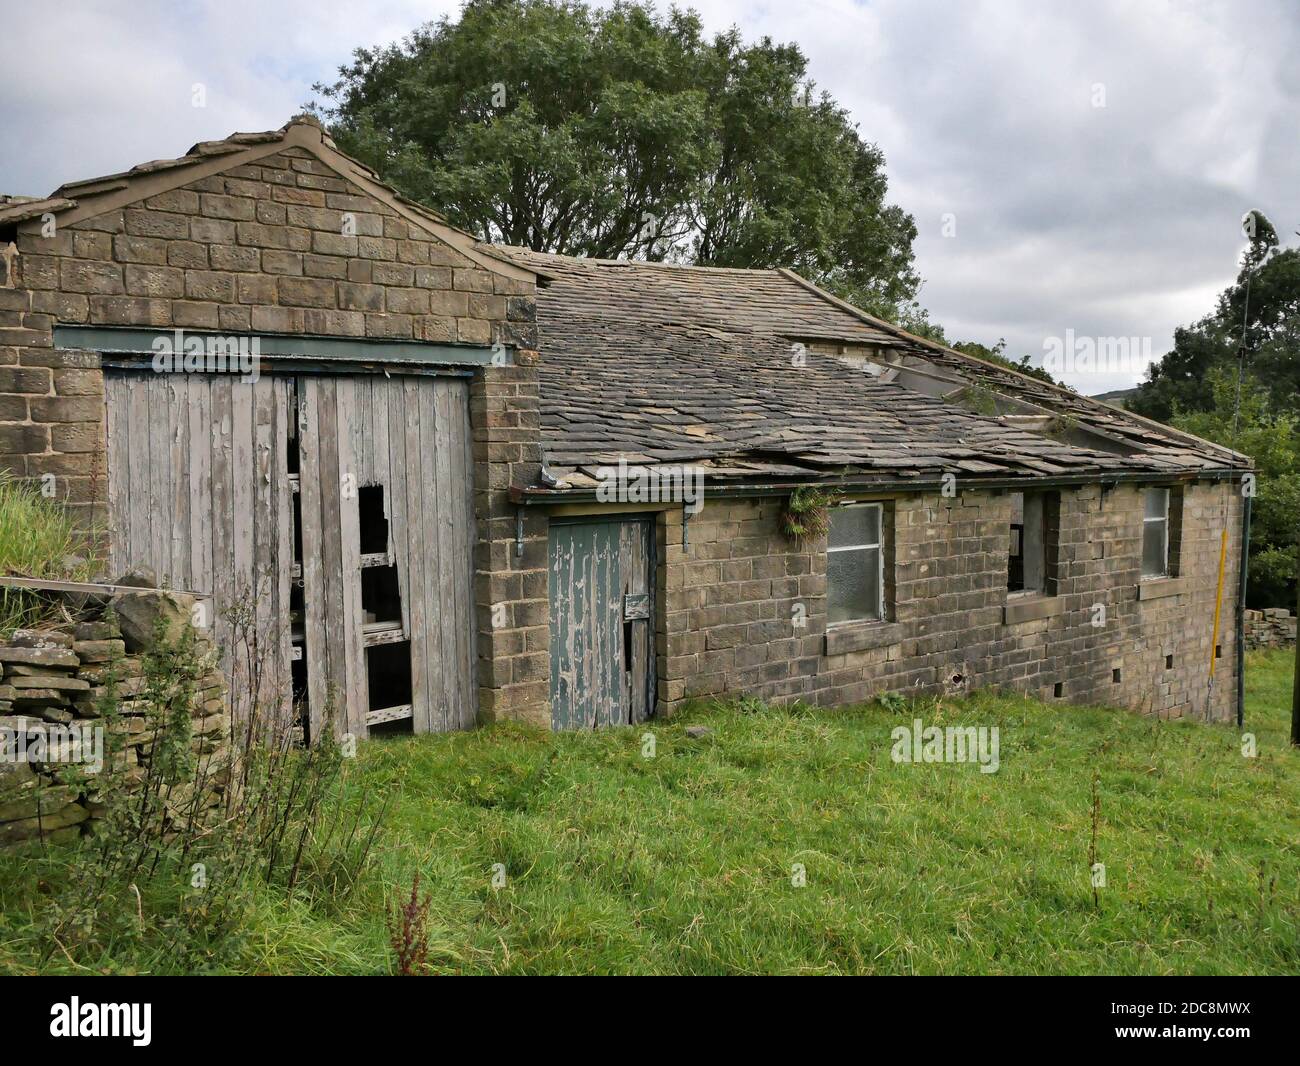 Abandoned old stone built single story barn with roof collapsed old wood doors falling apart field and trees in background Stock Photo